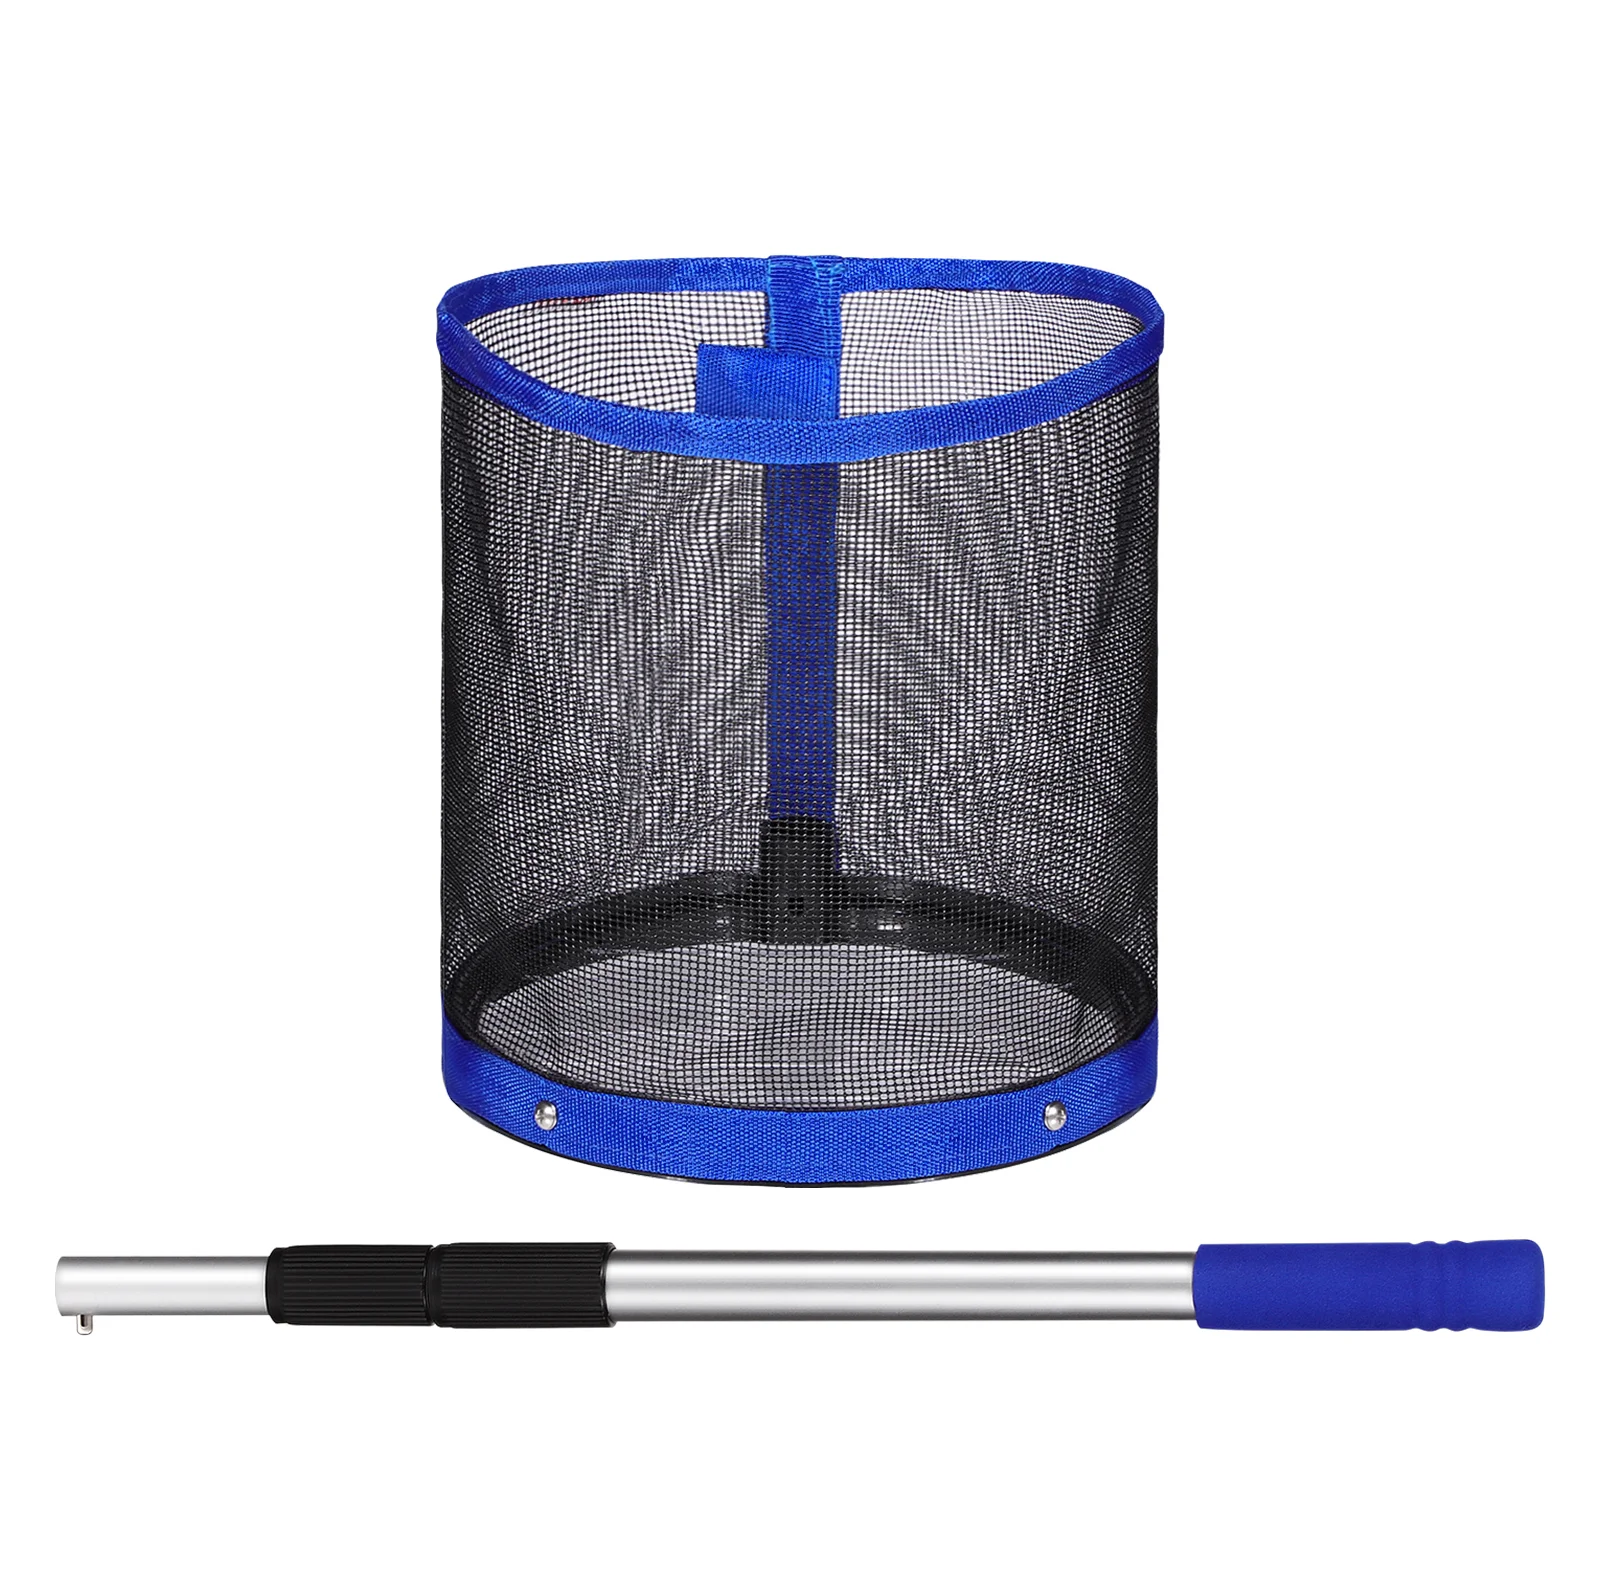 

Pong Picker Retriever Tennis Table Catcher Tube Pingpong Container Organizer Collector Storage Net Game Multi Games